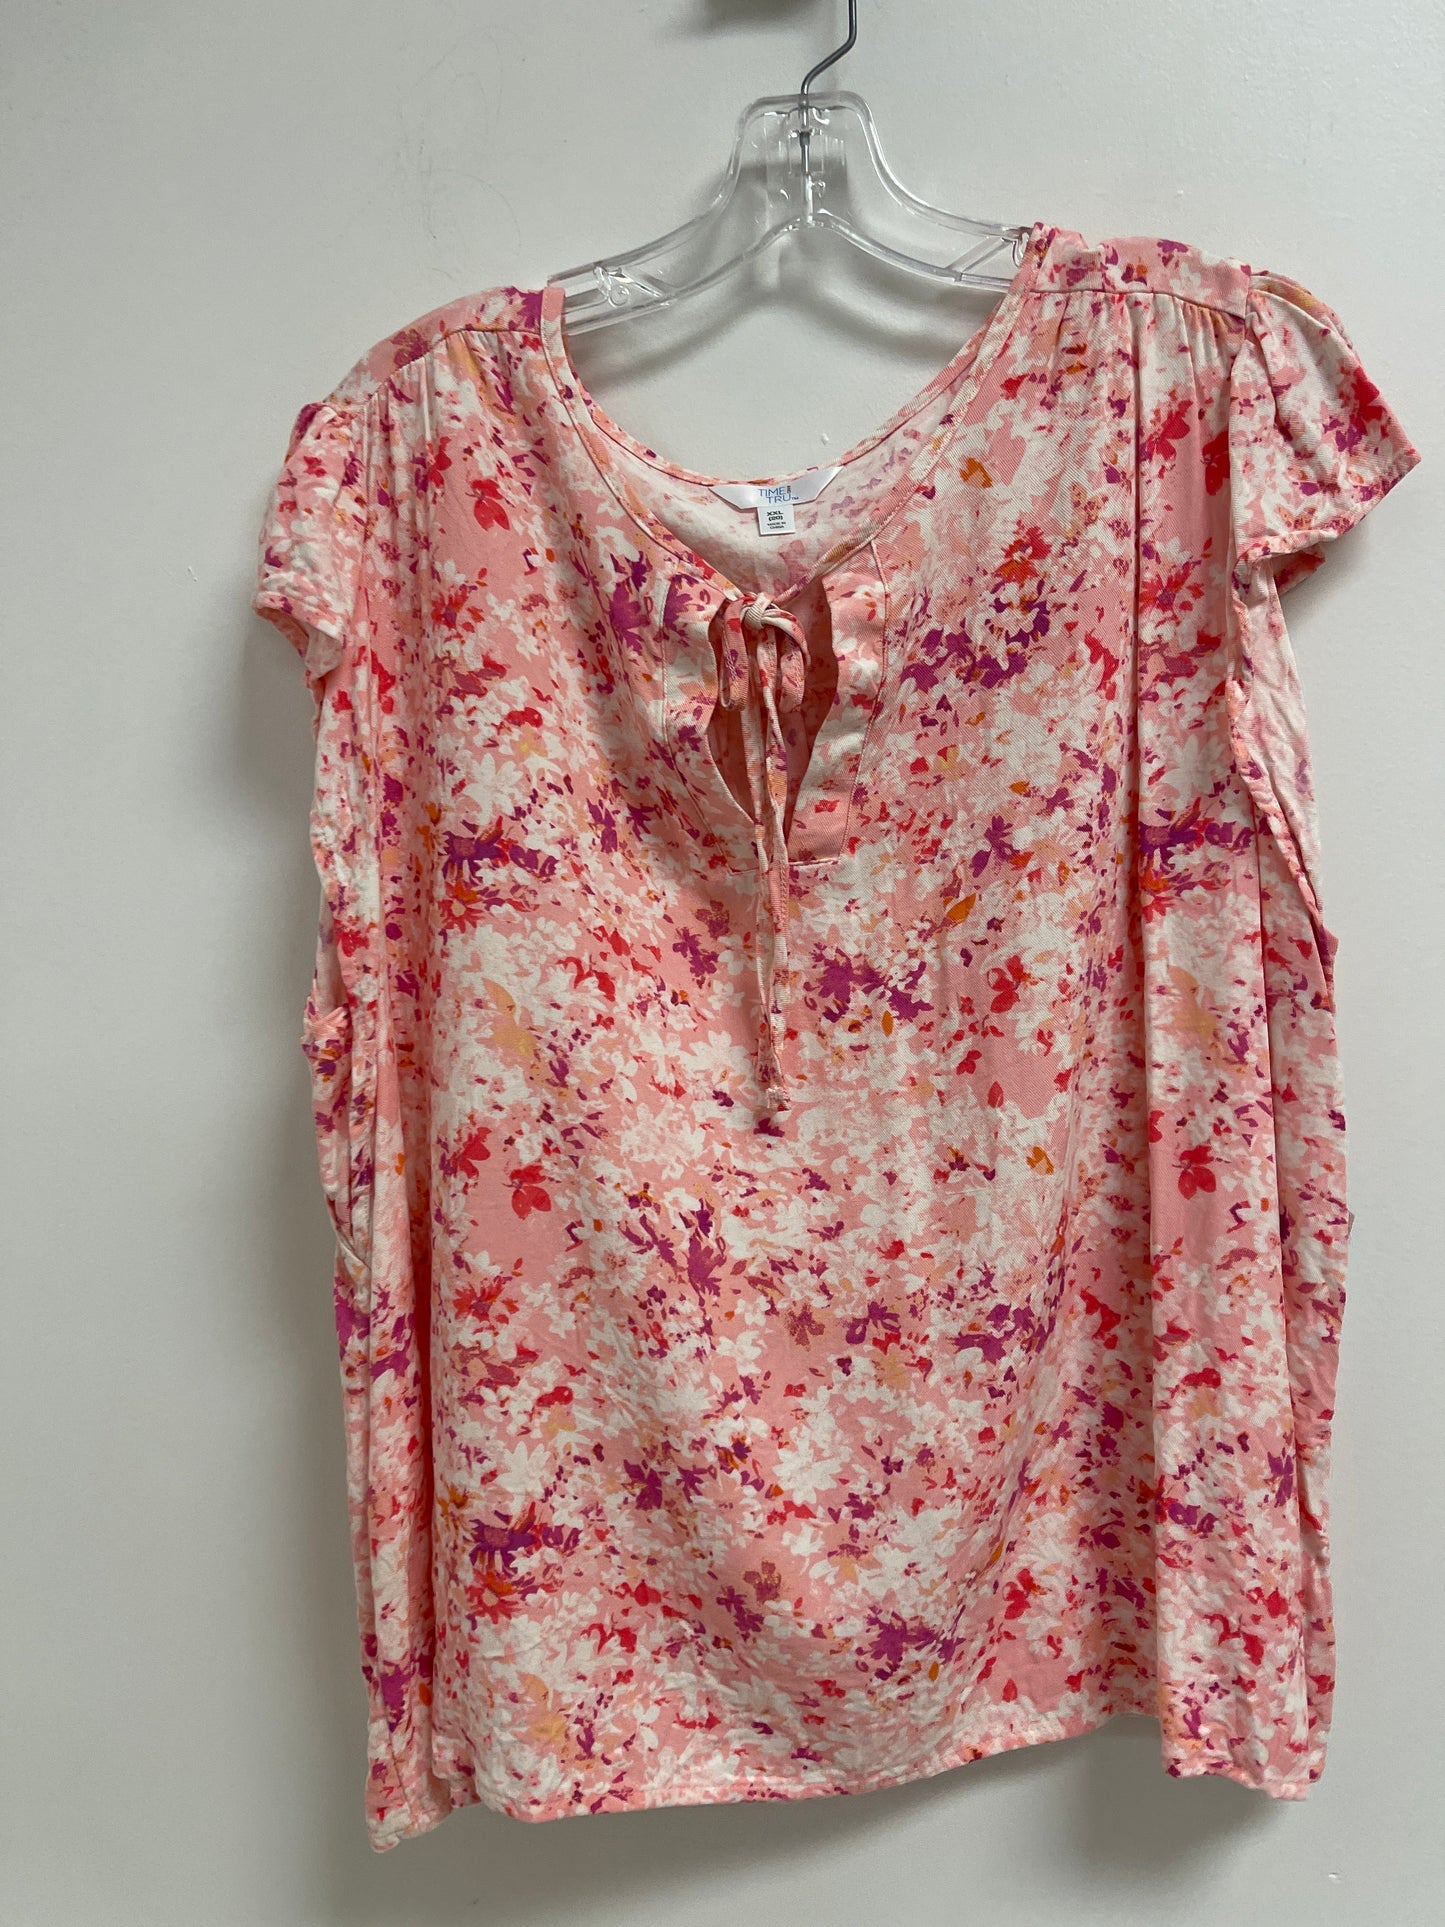 Pink Top Short Sleeve Time And Tru, Size 2x